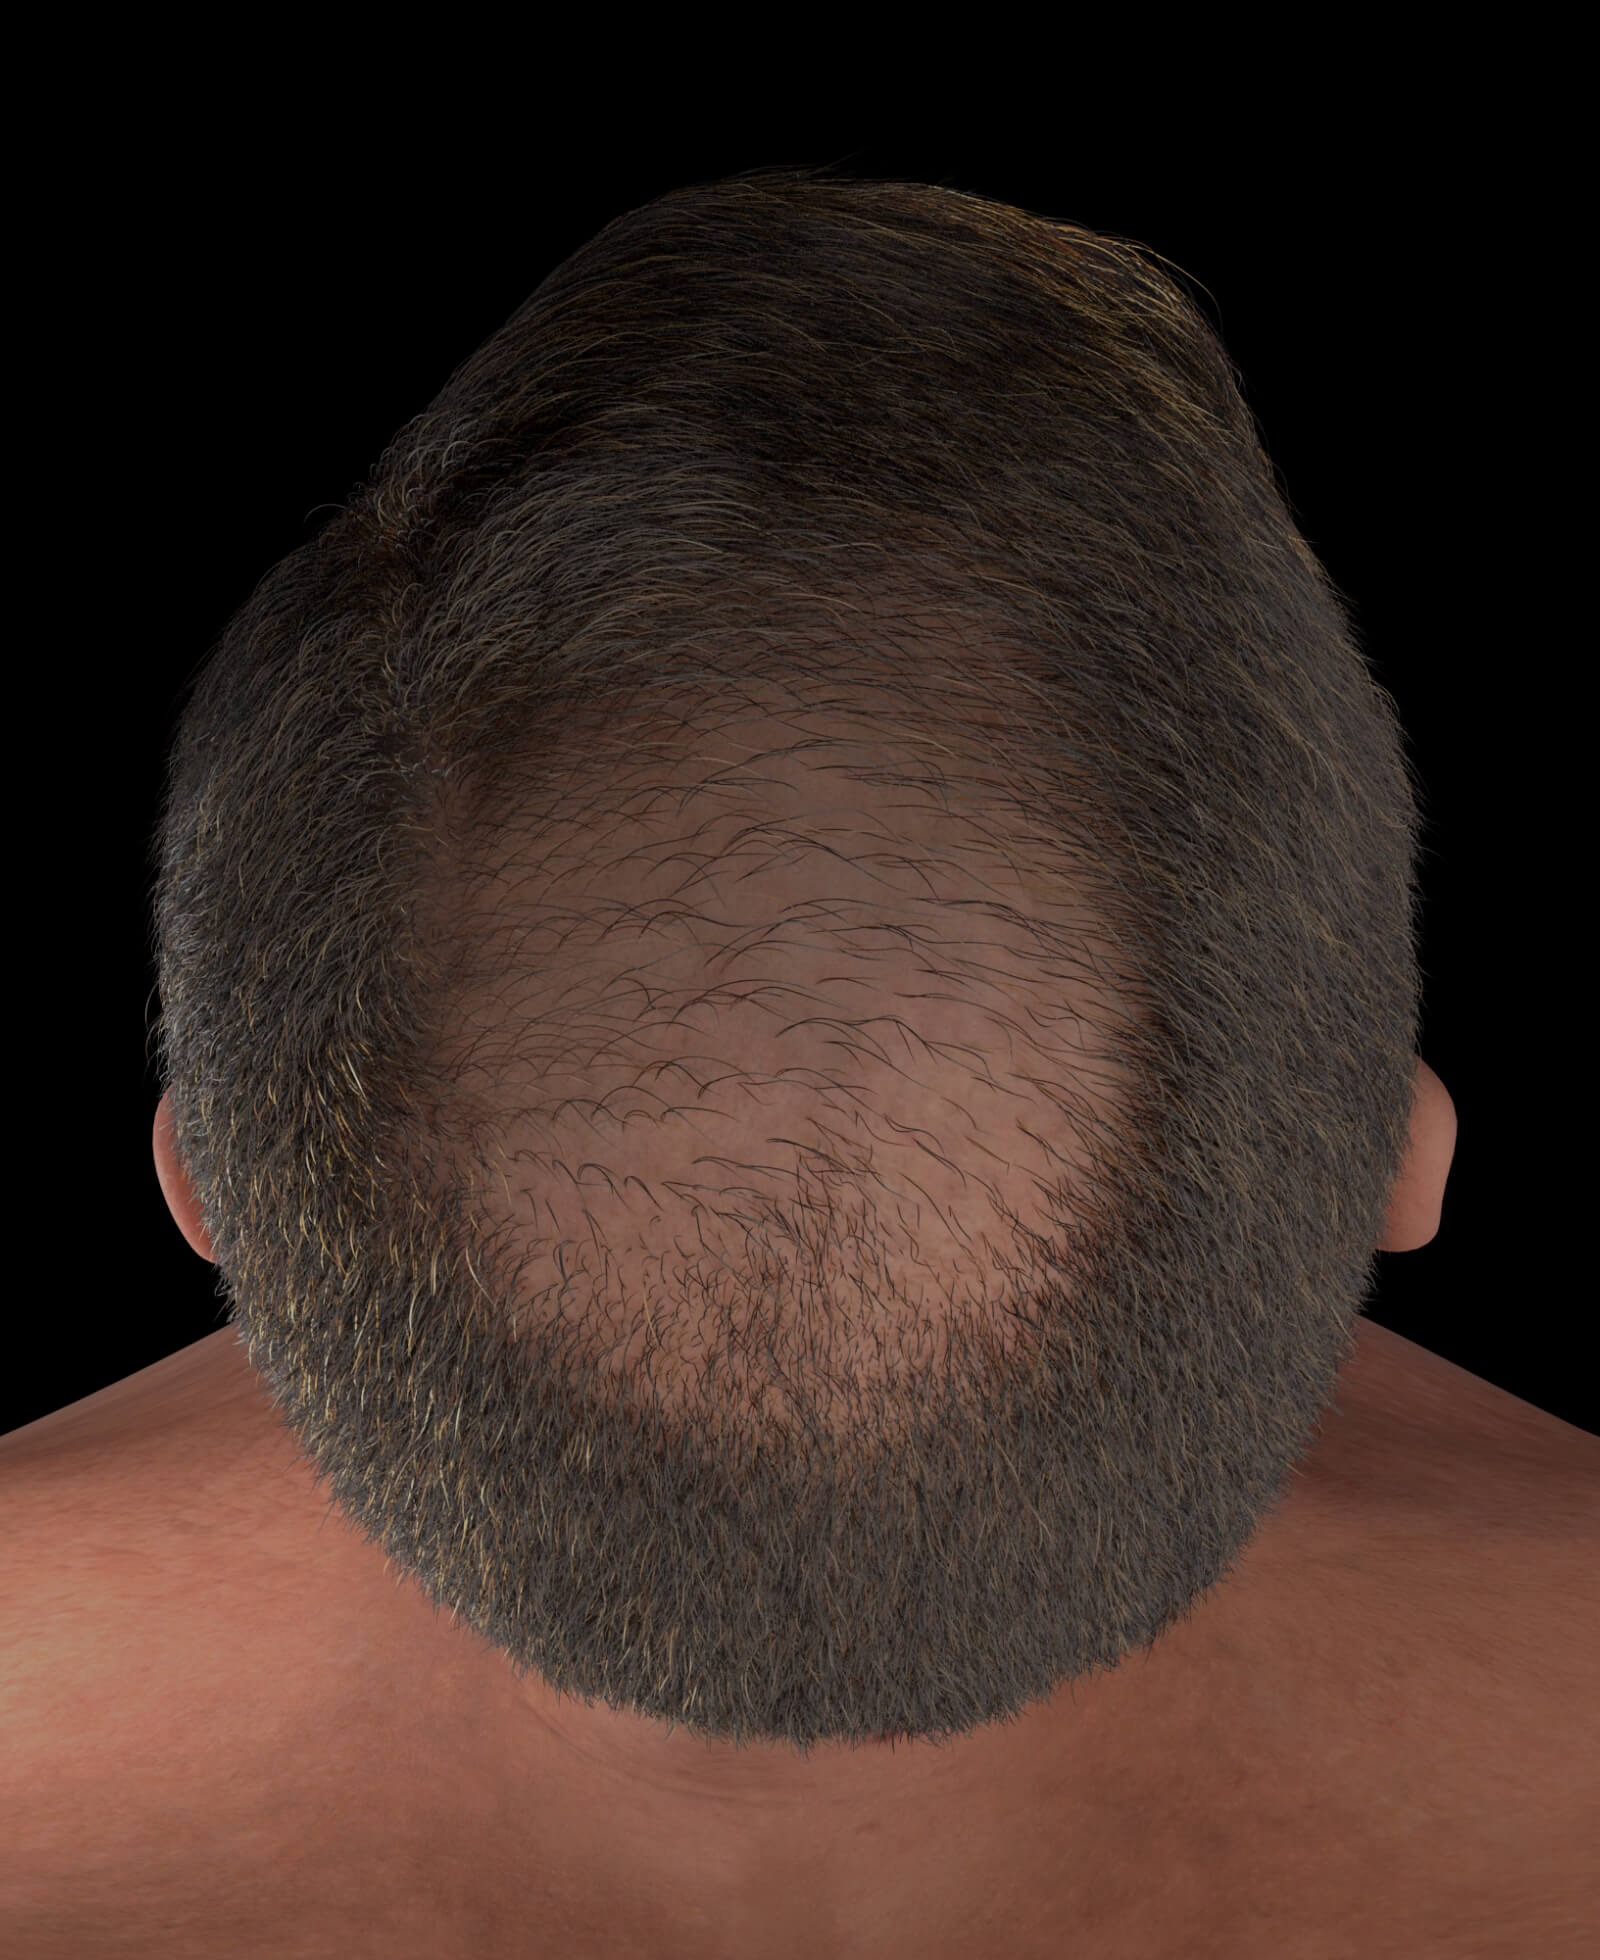 Male patient from Clinique Chloé with hair loss